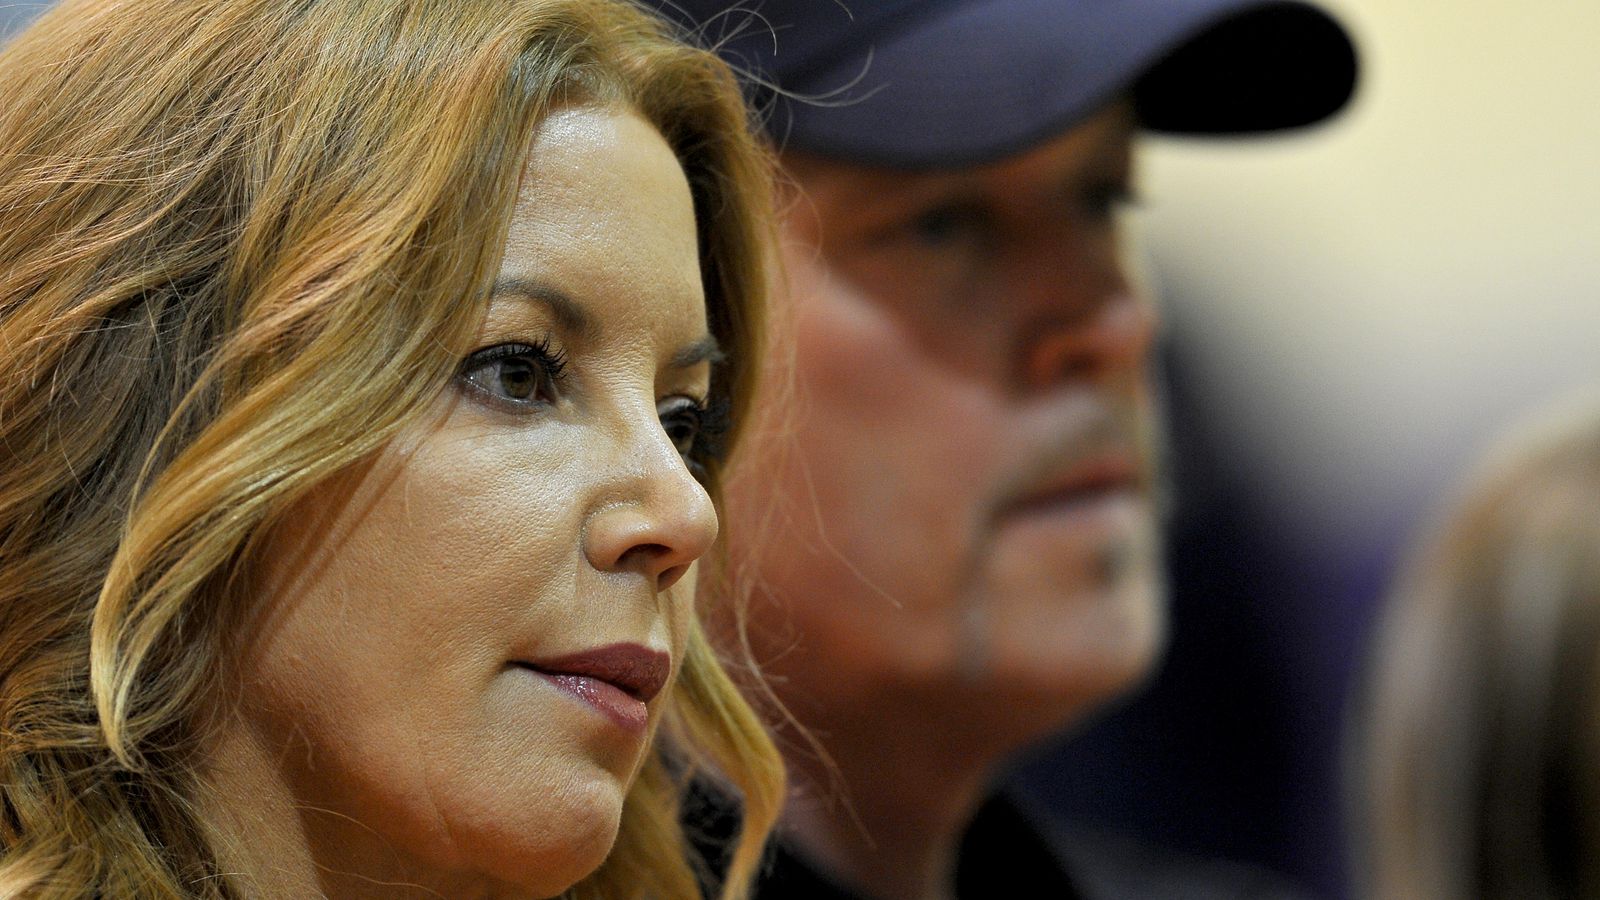 Jeanie Buss says the Lakers season makes her "uncomfortable" .